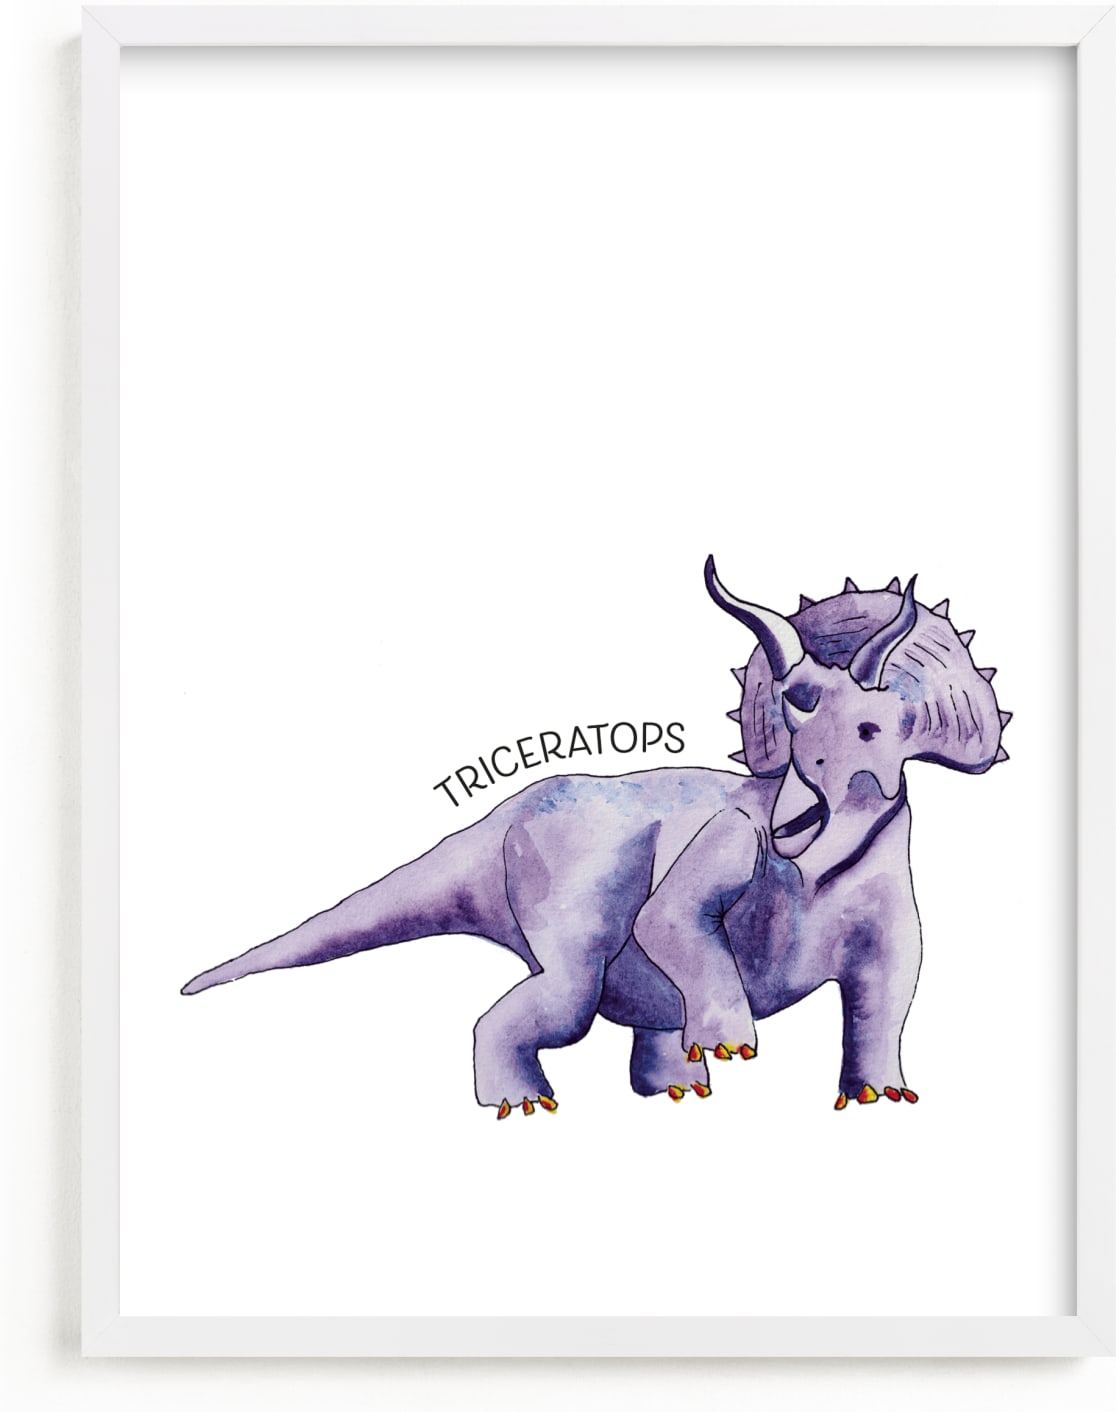 This is a purple art by Rachel Getz called Watercolor Dino Party Triceratops.